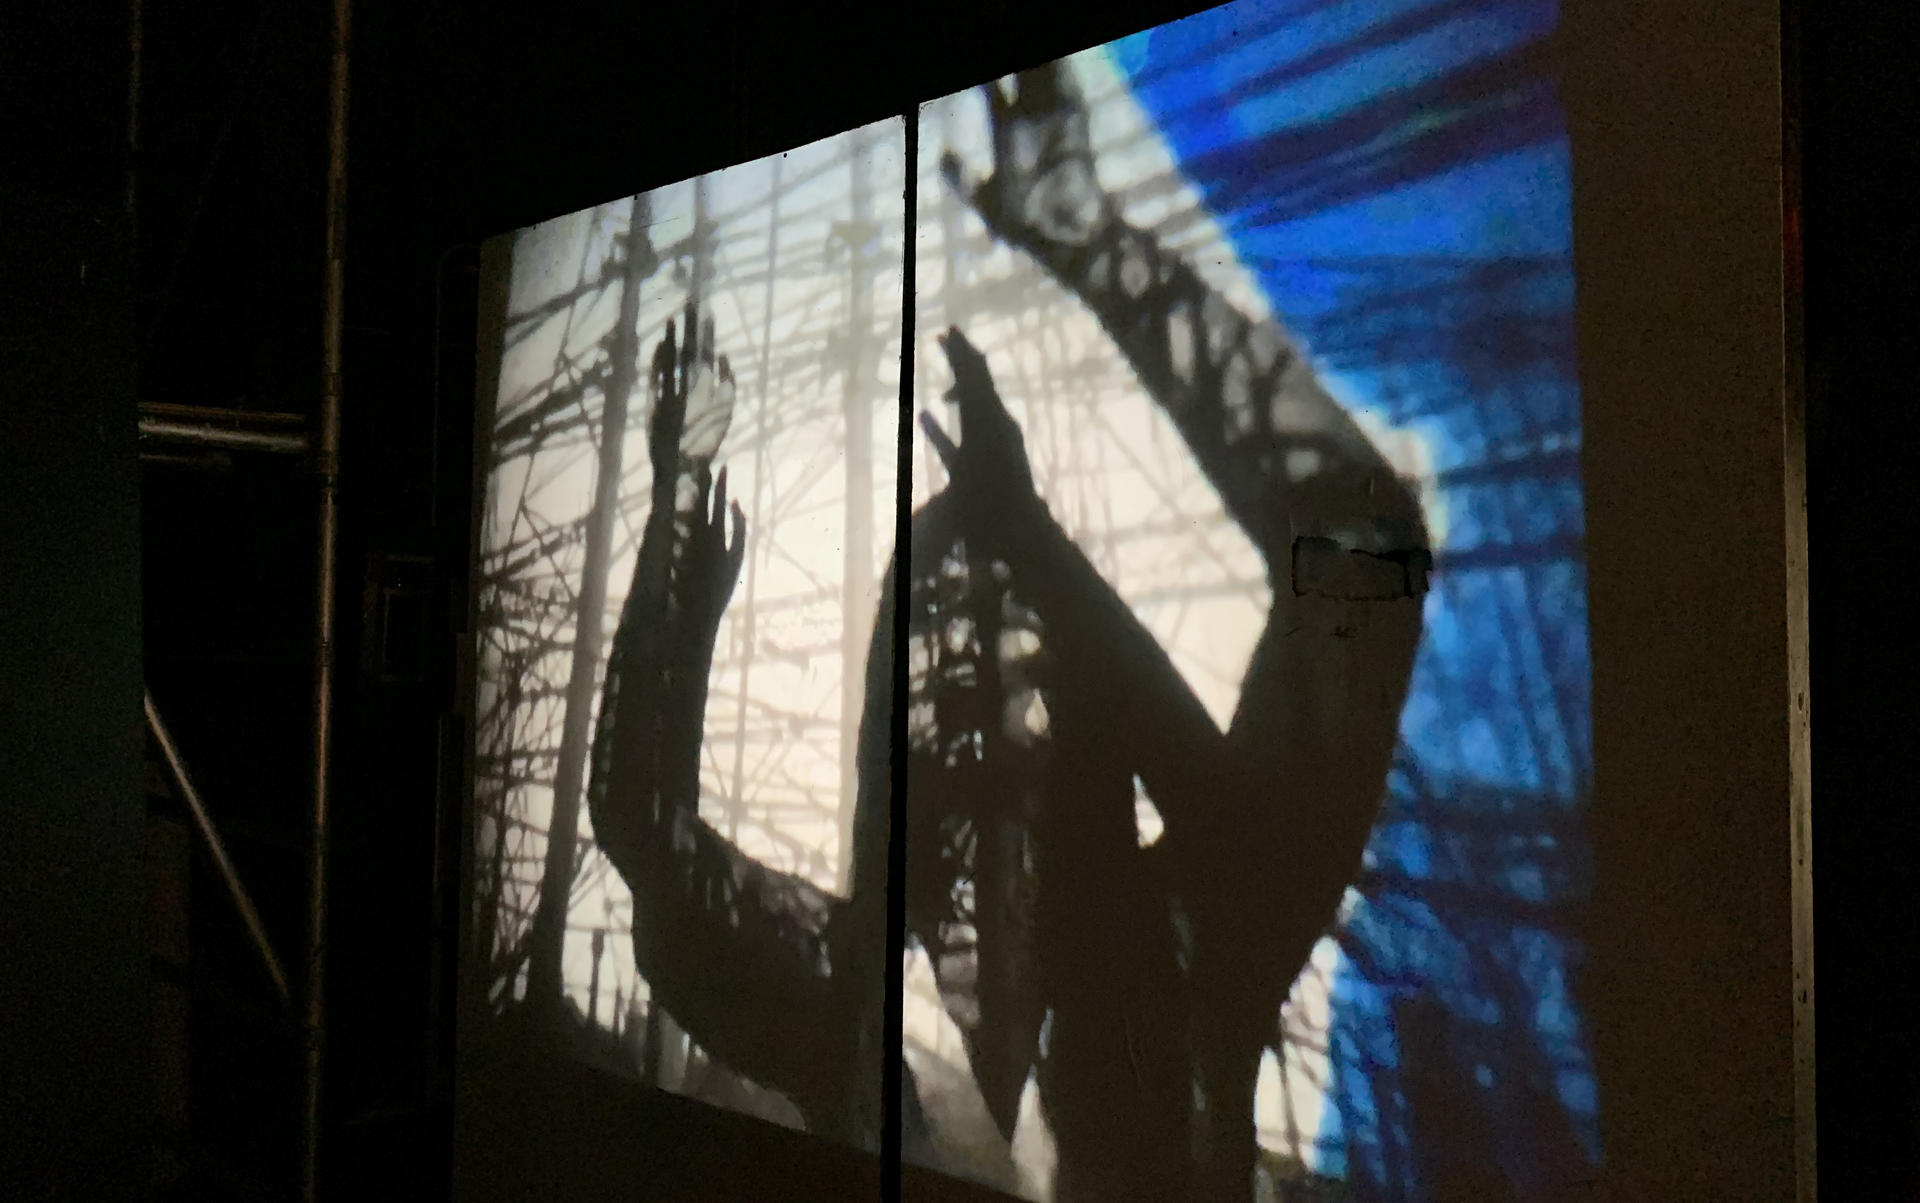 Frame from an animation lights up a dark room. It shows a human figure reaching amidst a web of lines like scaffolding or telephone poles and lines 